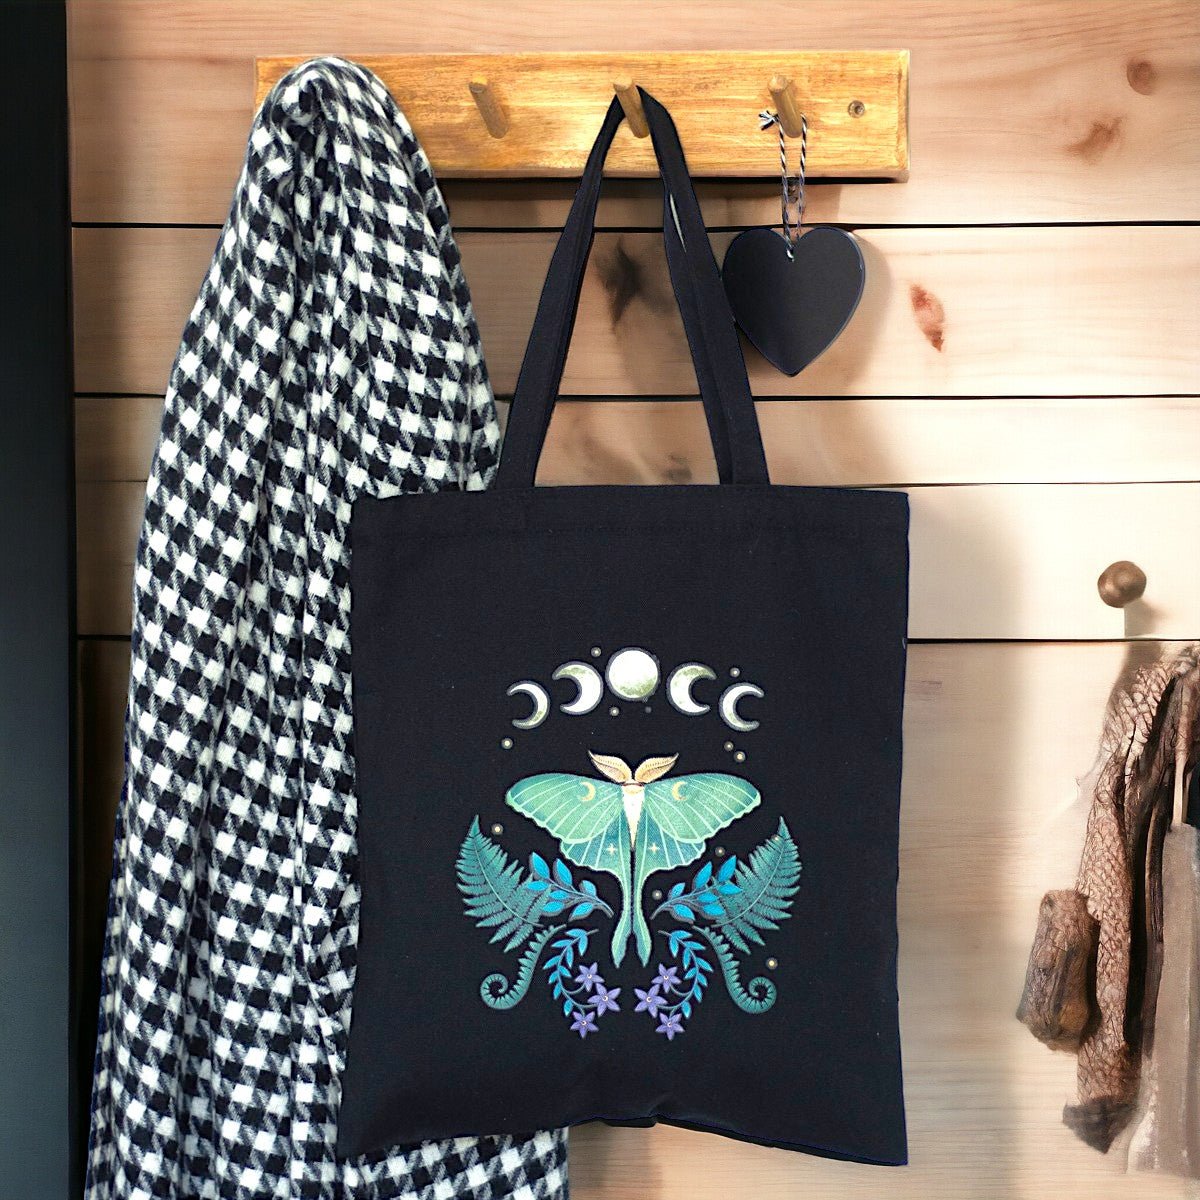 Tote Bags & Shopping Bags - The Fashion Gift Shop